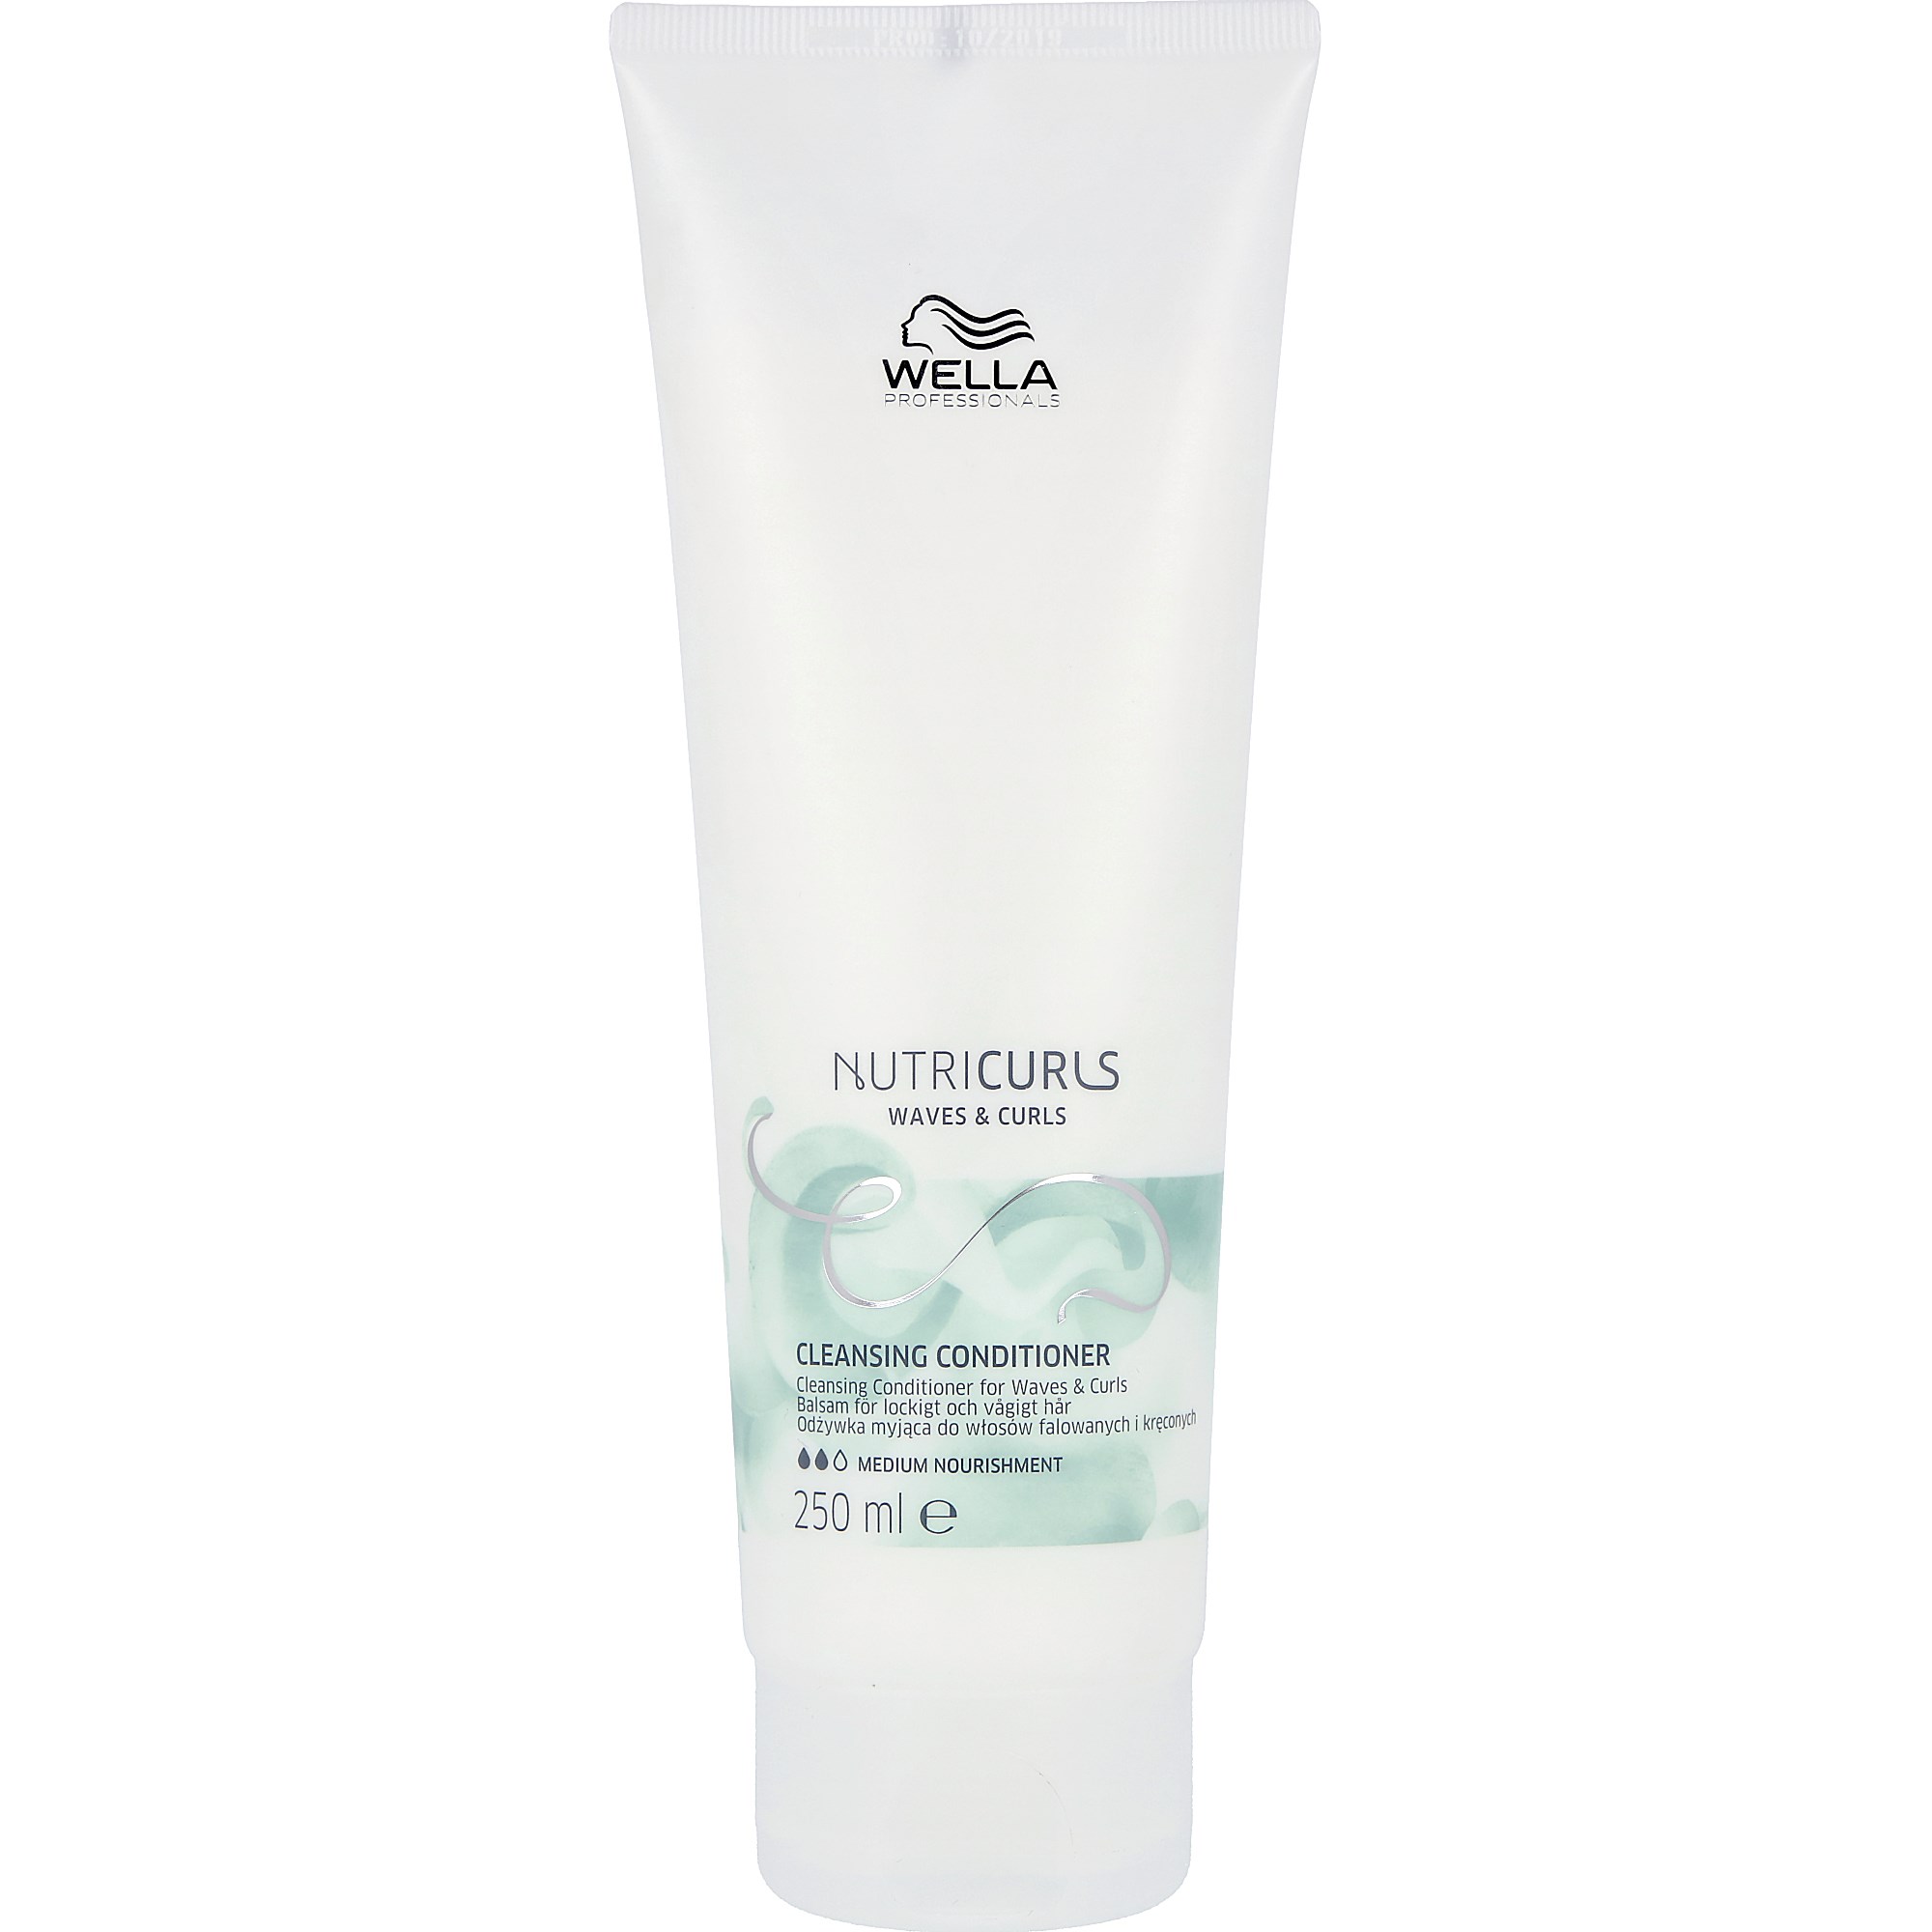 Wella Professionals Nutricurls Cleansing Conditioner for Waves &